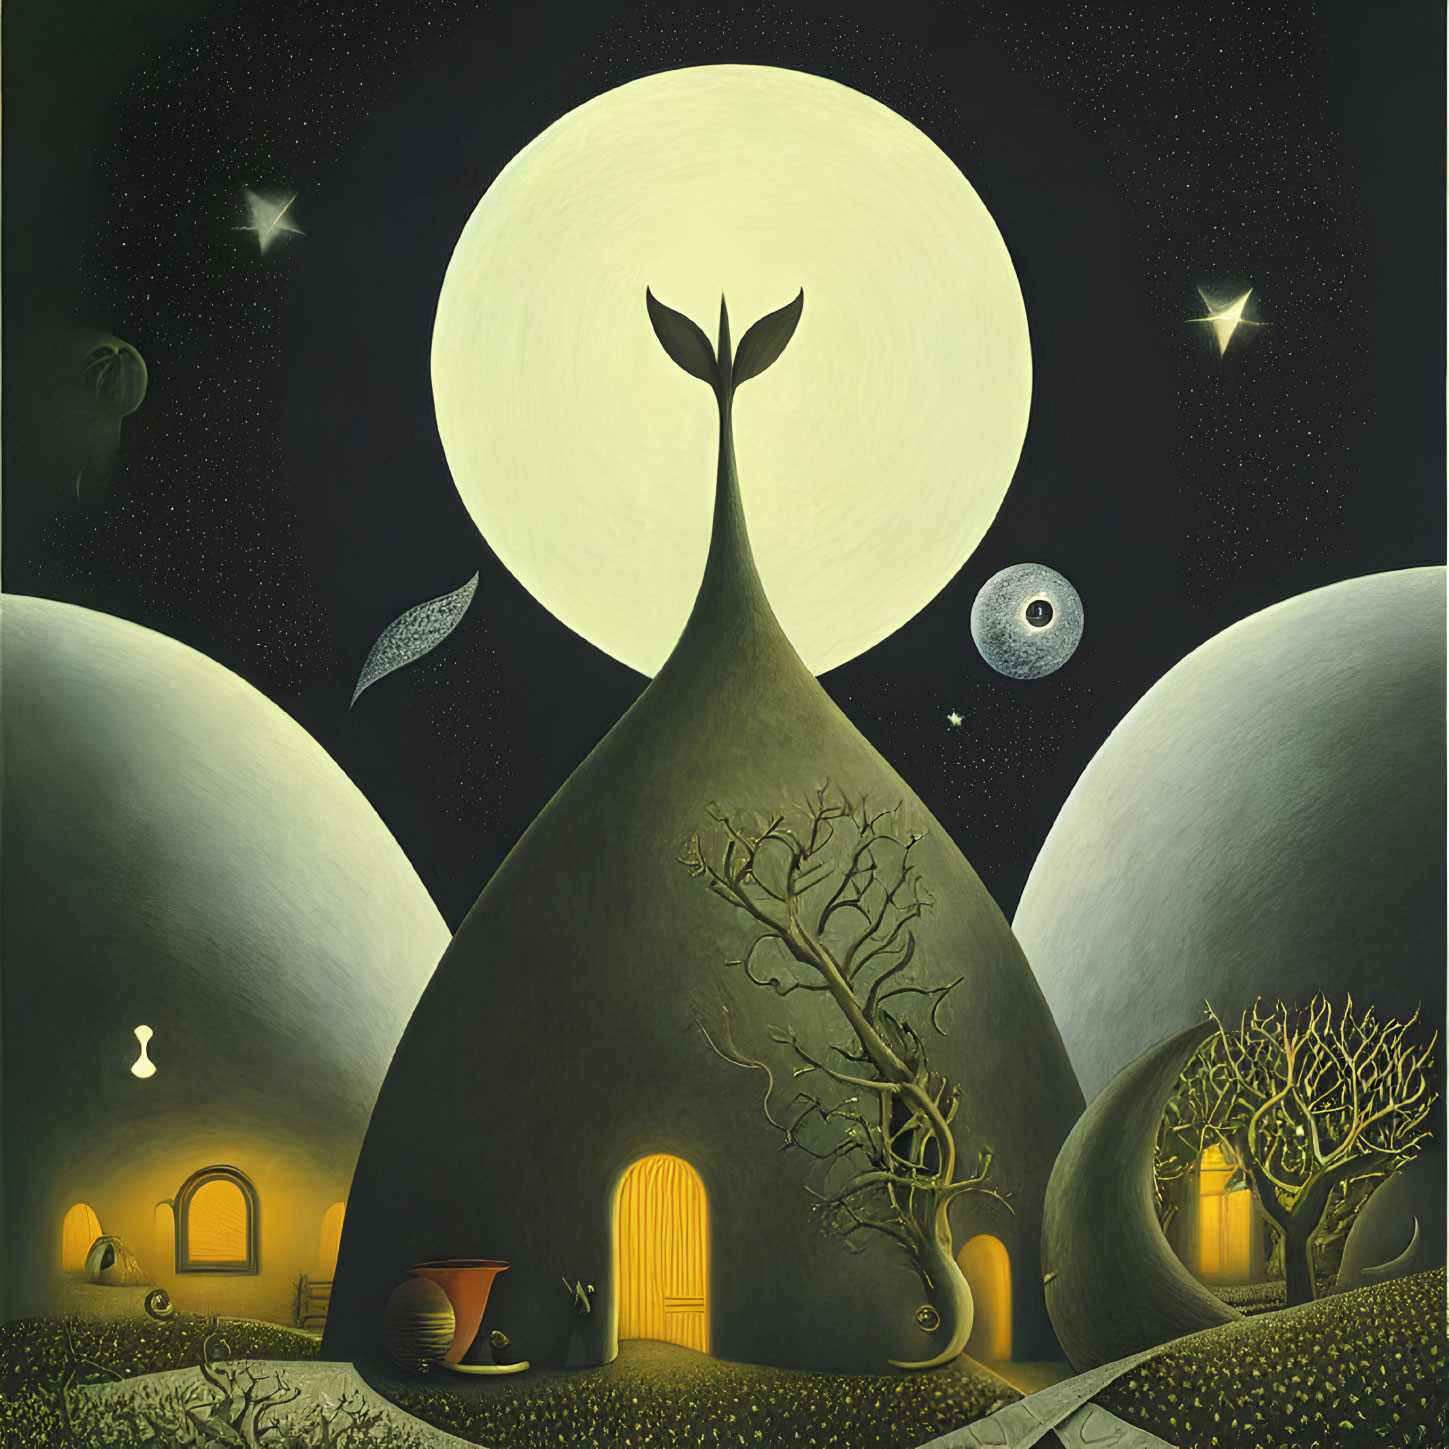 Nighttime landscape with moon, hills, tree silhouette, stars, and warm-lit windows